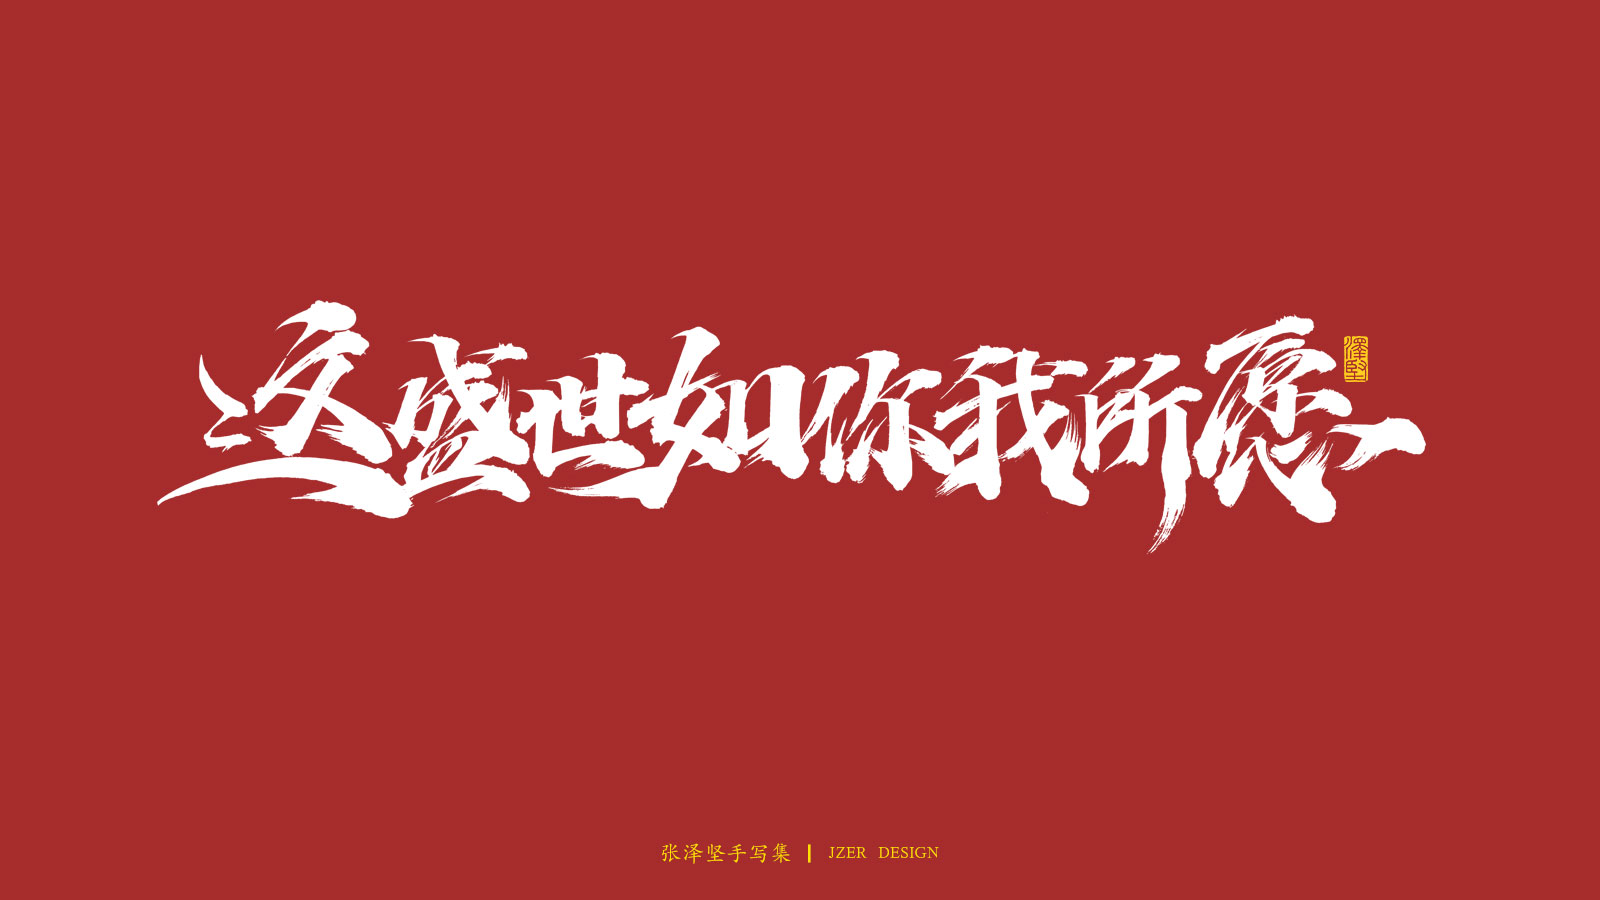 26P Collection of the latest Chinese font design schemes in 2021 #.667